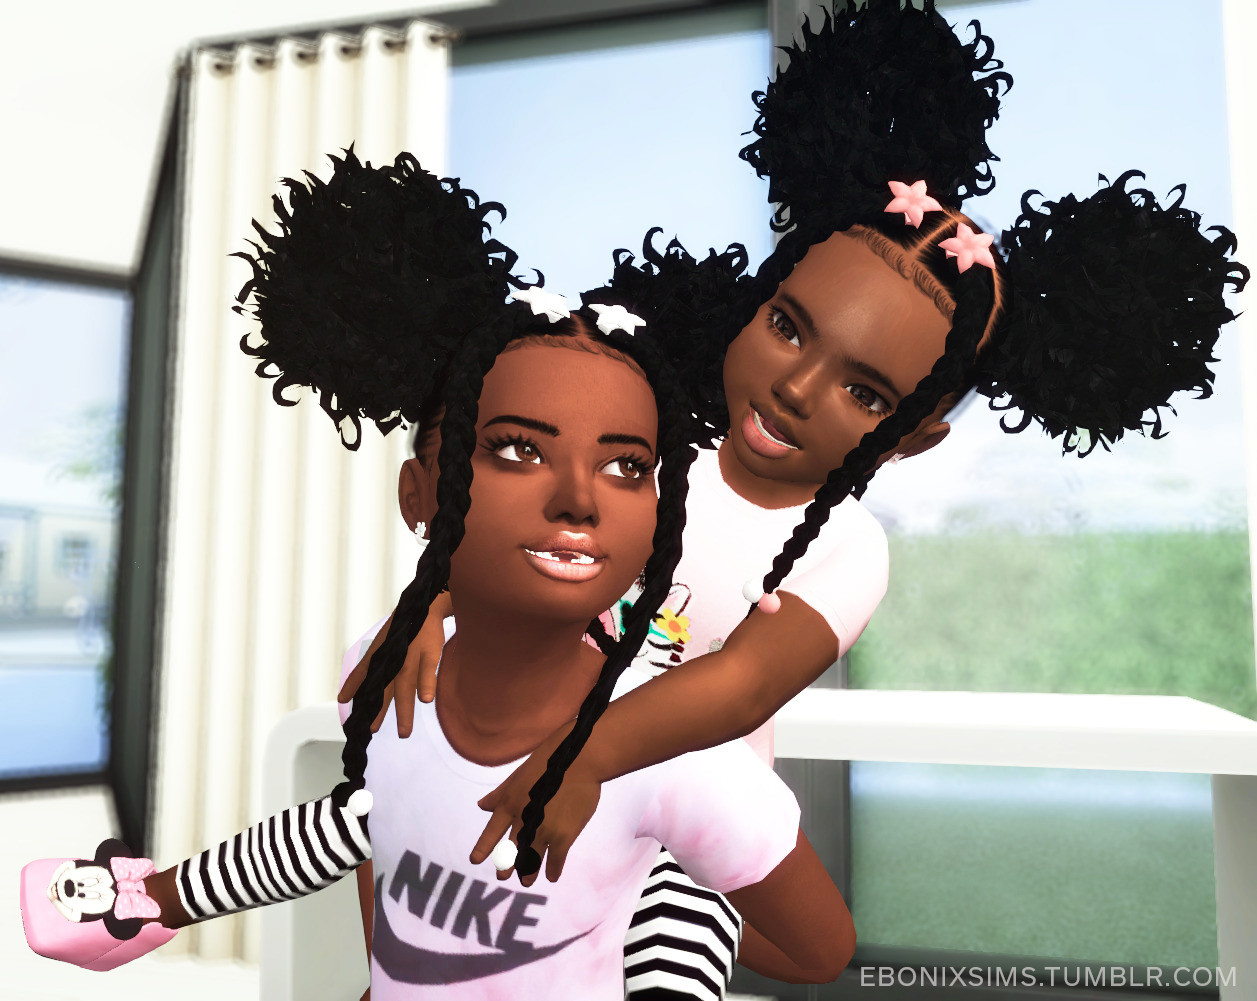 Black Hairstyles Sims 4
 How Black Women Made The Sims 4 Their Own IGN